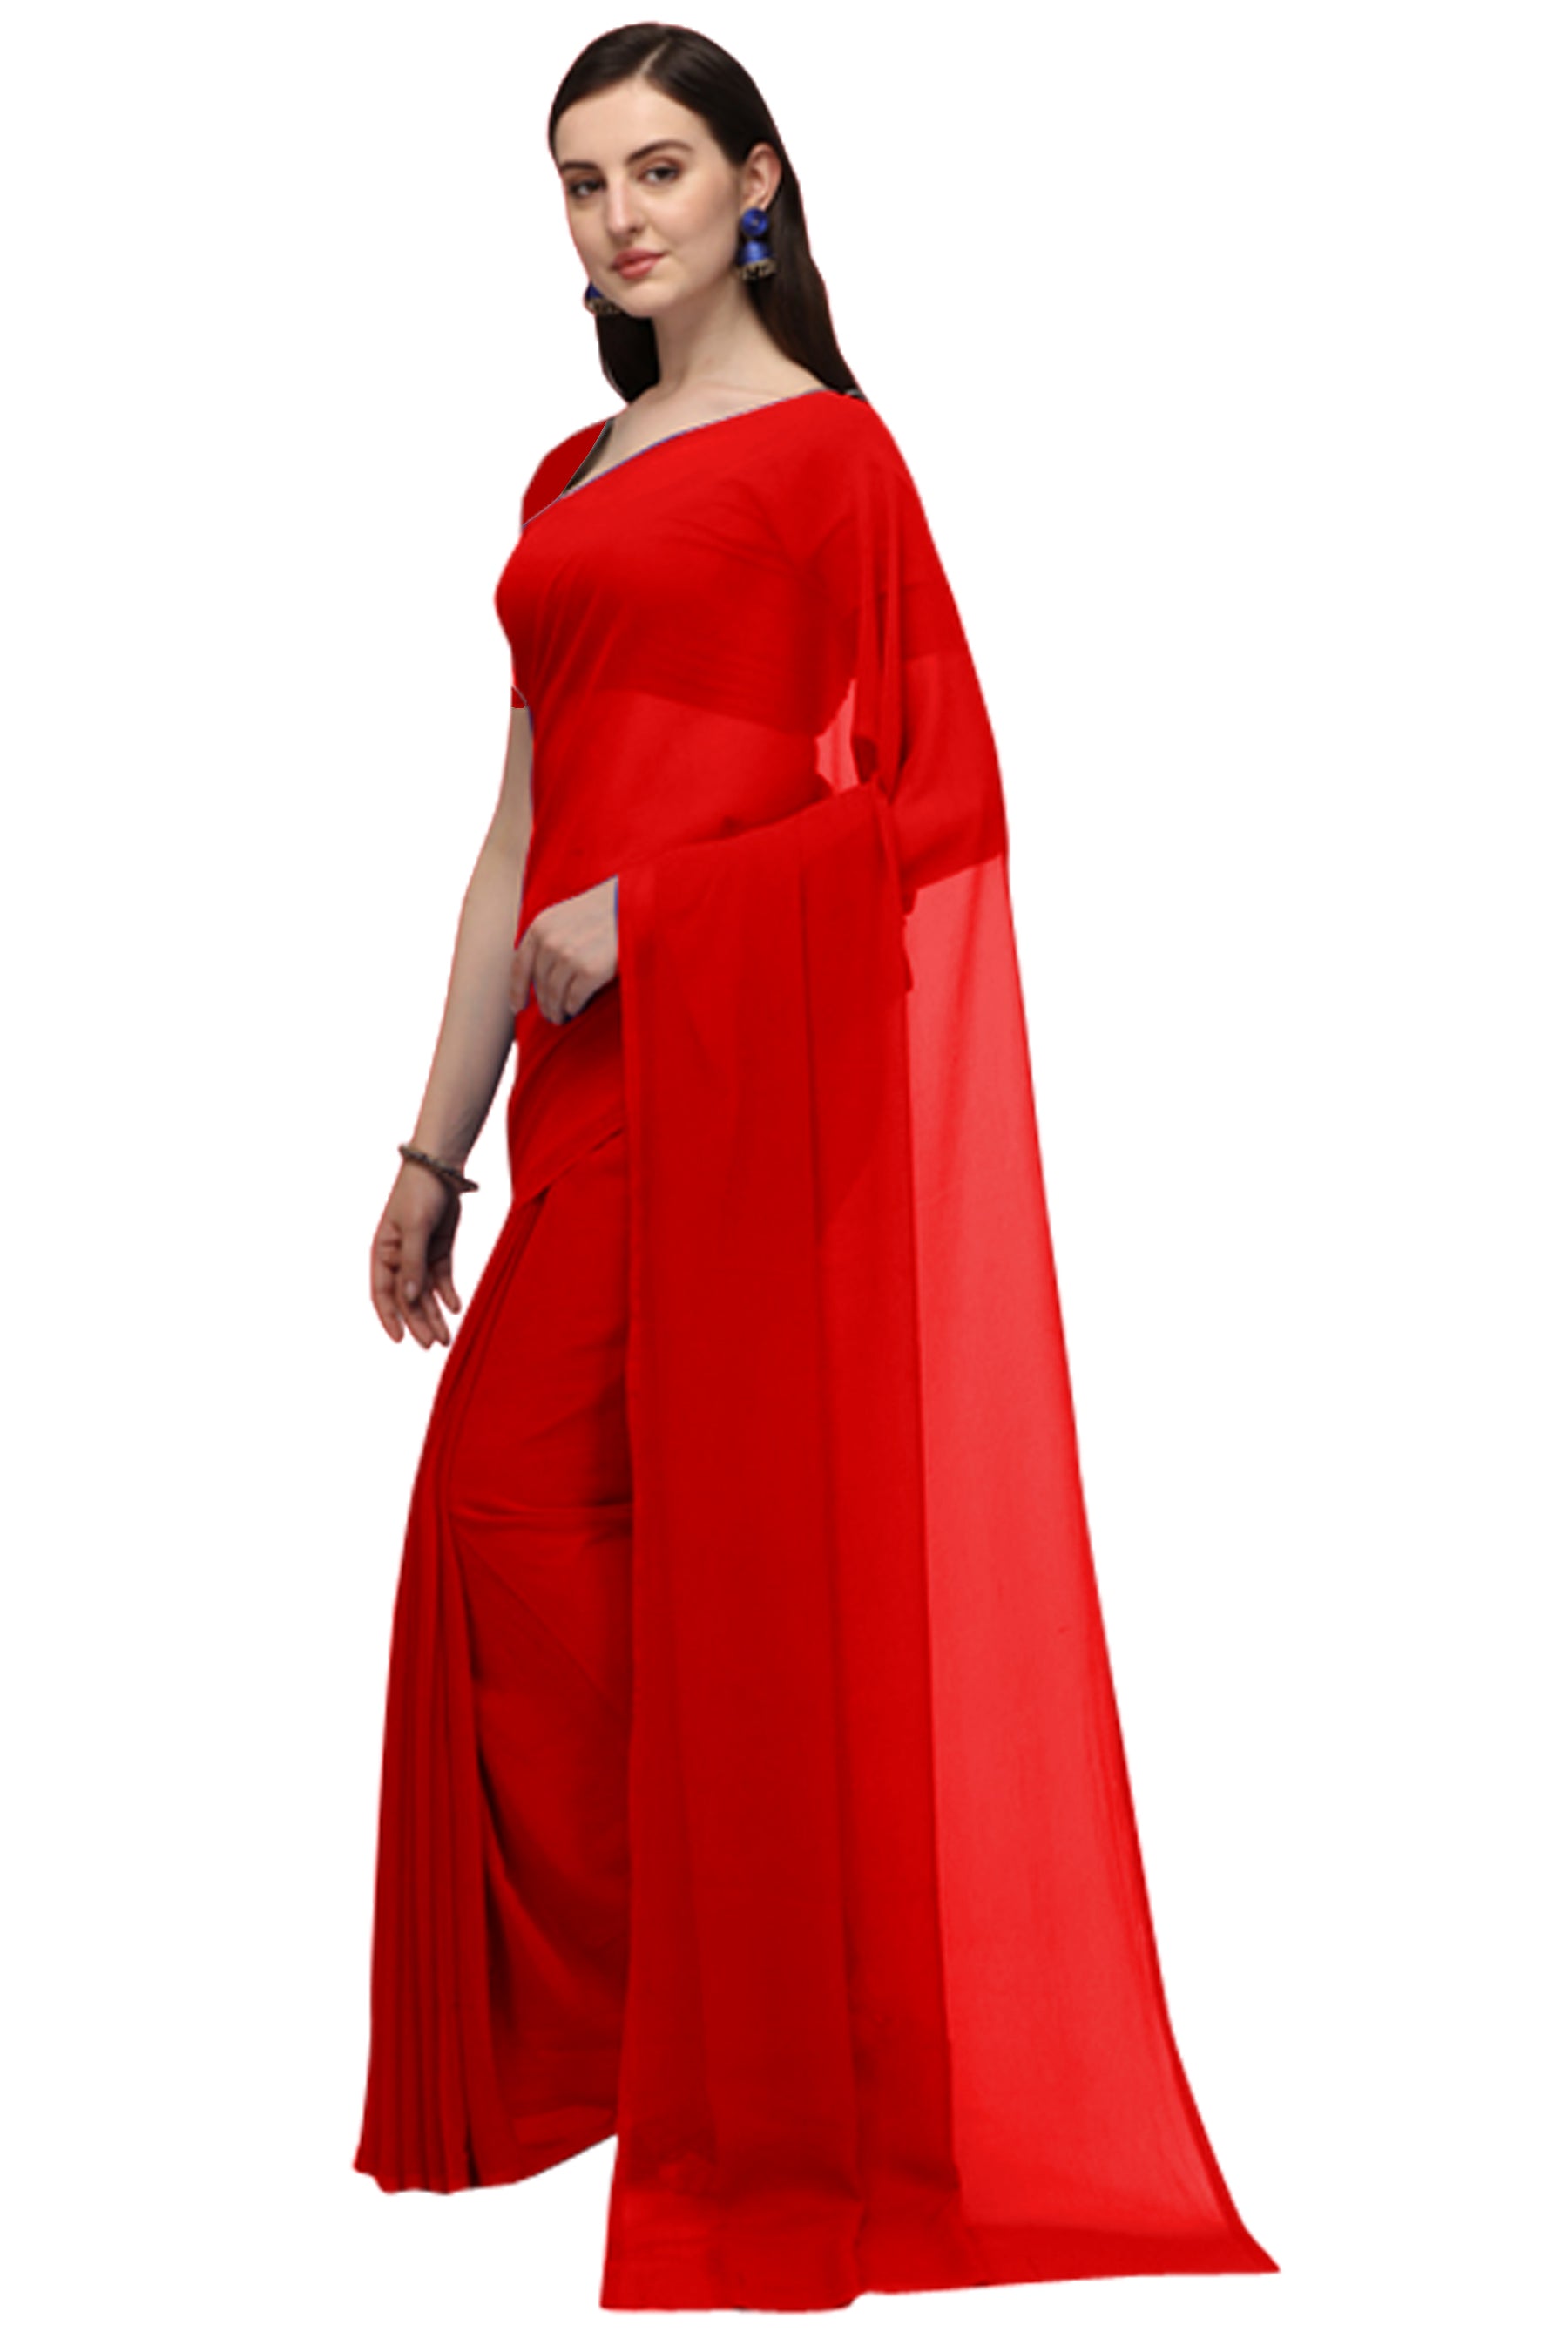 Women's Plain Woven Daily Wear  Formal Georgette Sari With Blouse Piece (Red) - NIMIDHYA